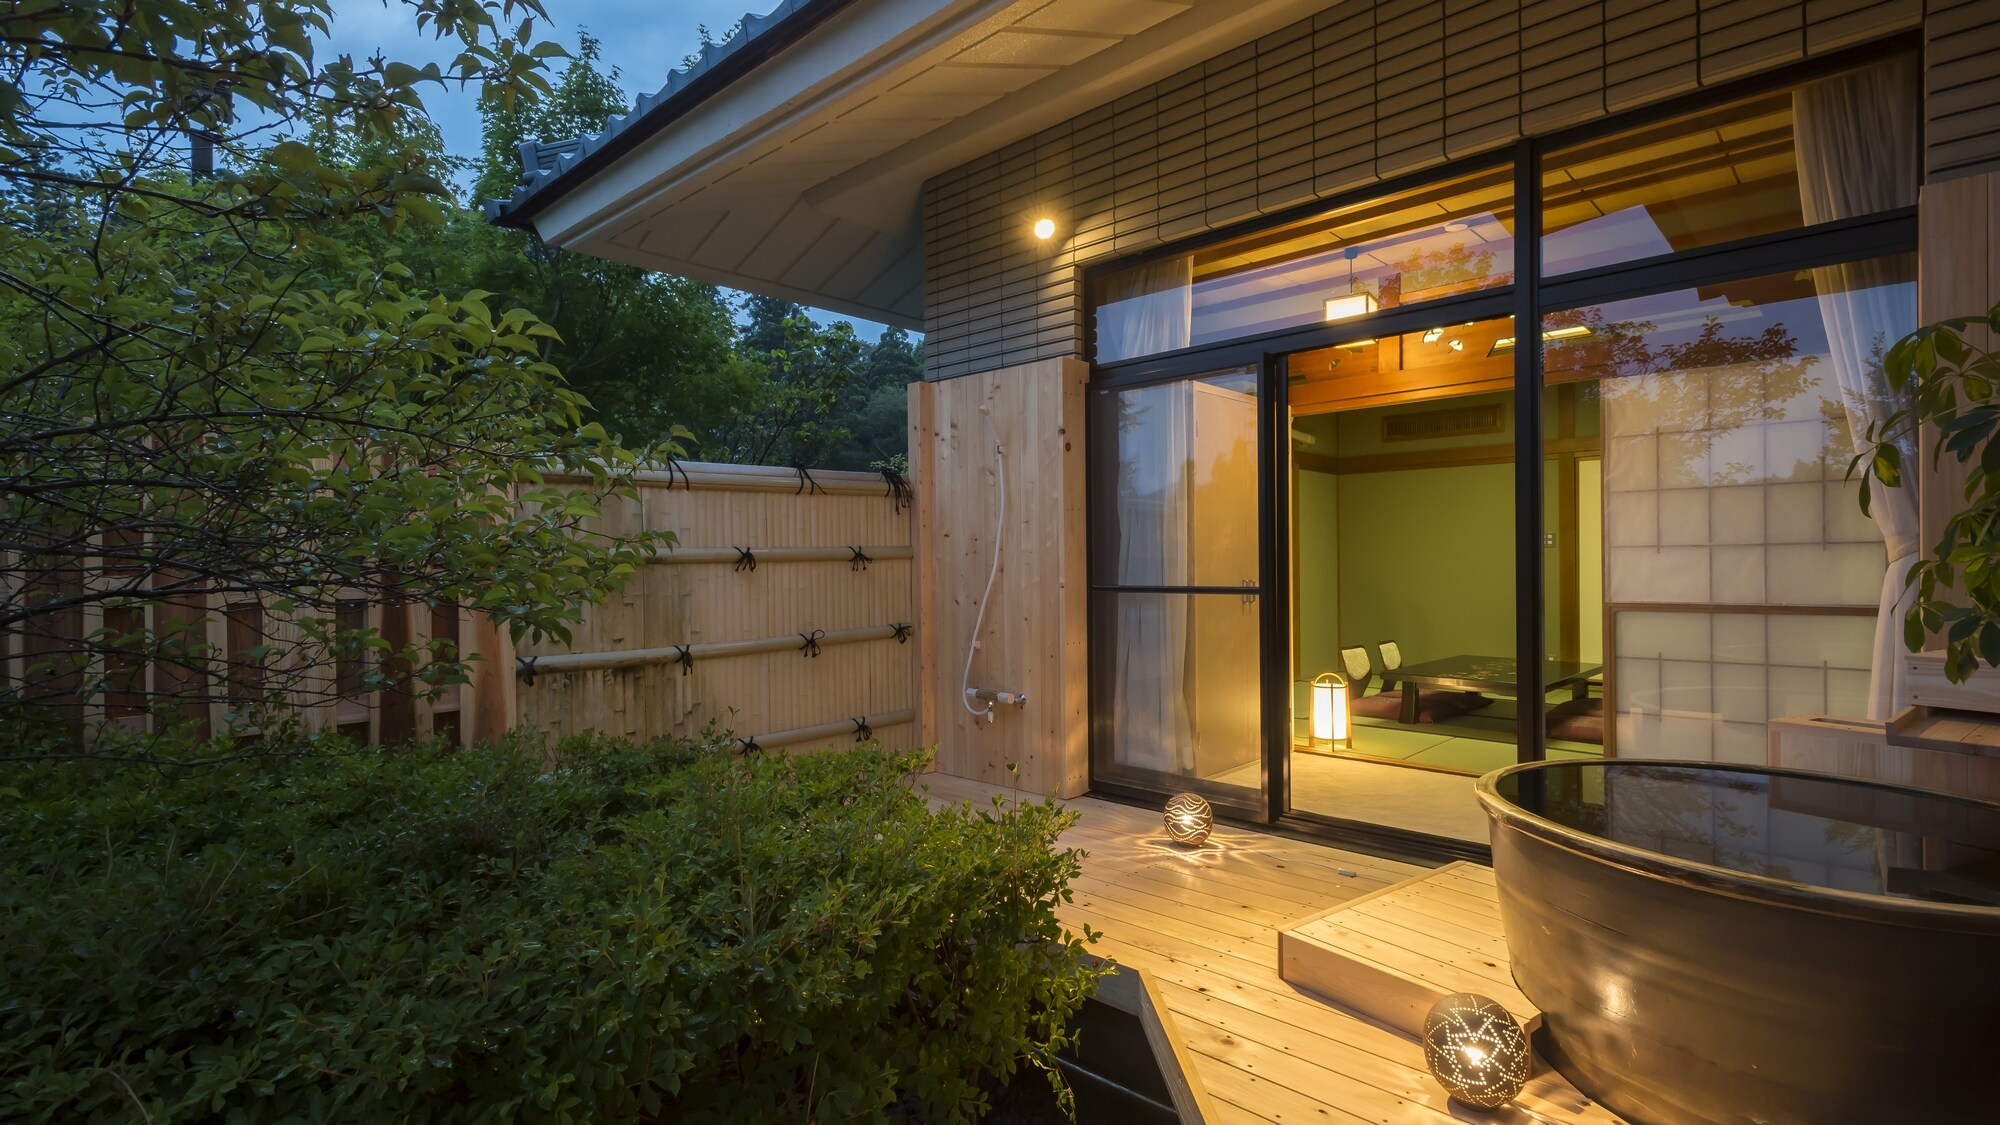 Please spend quality time in the guest room with an open-air bath